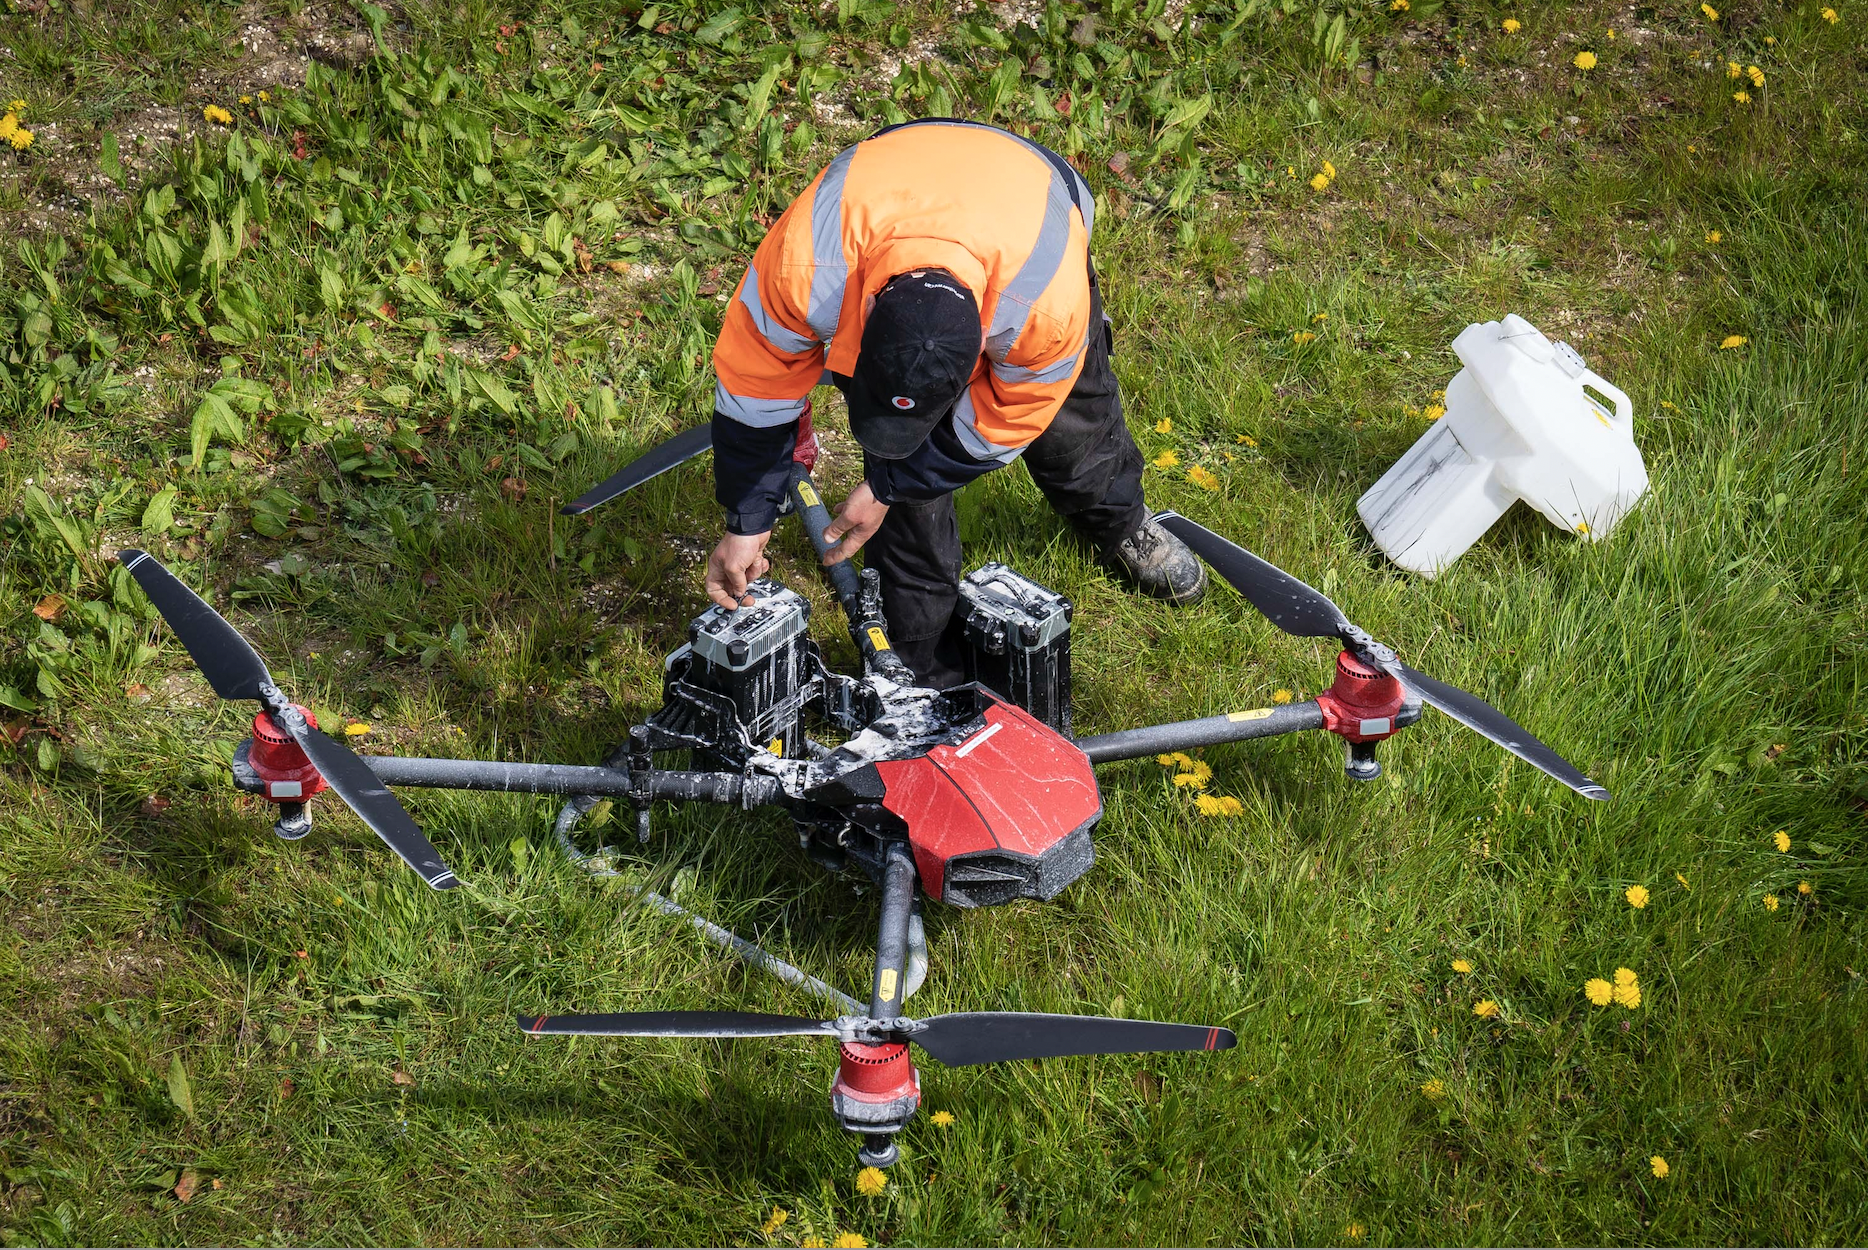 Pilot Swapping Battery for Drone